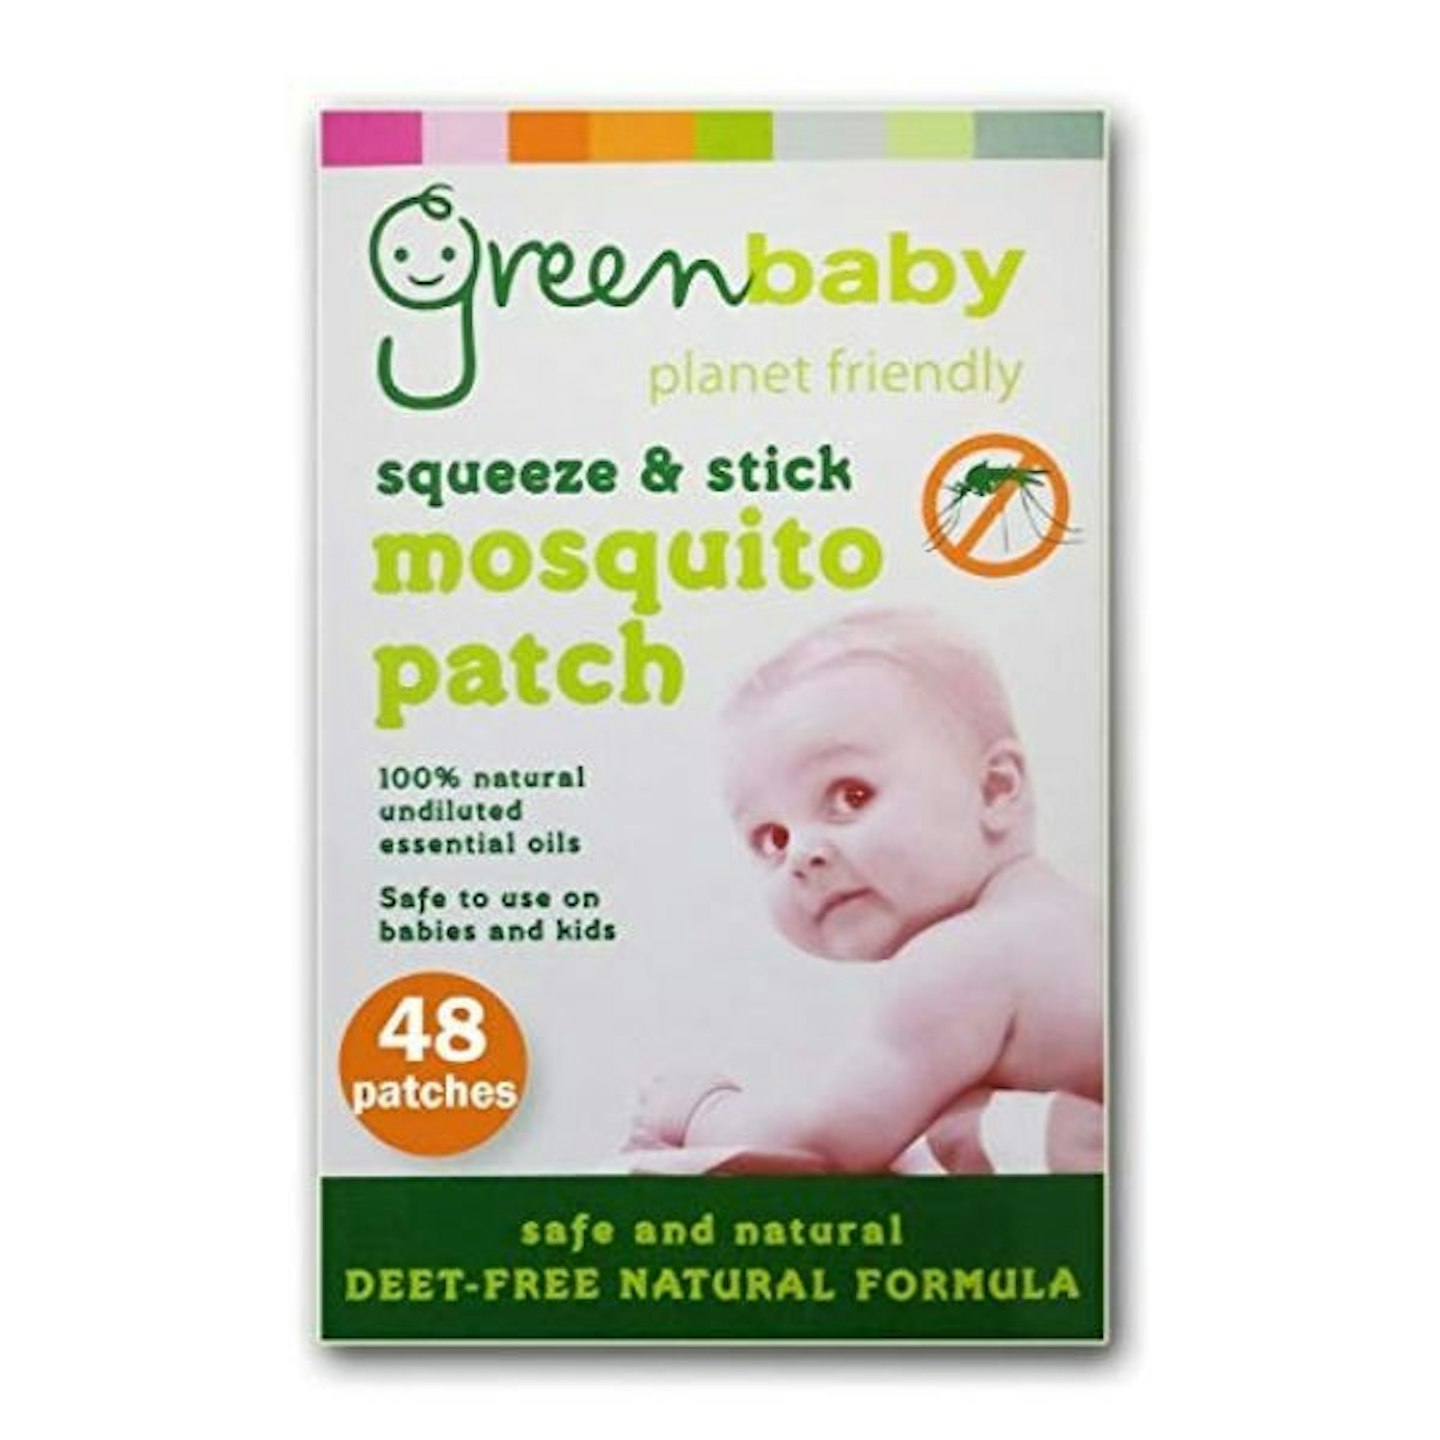 VIE Greenbaby, Squeeze &; Stick Mosquito Patches (48 Patches)